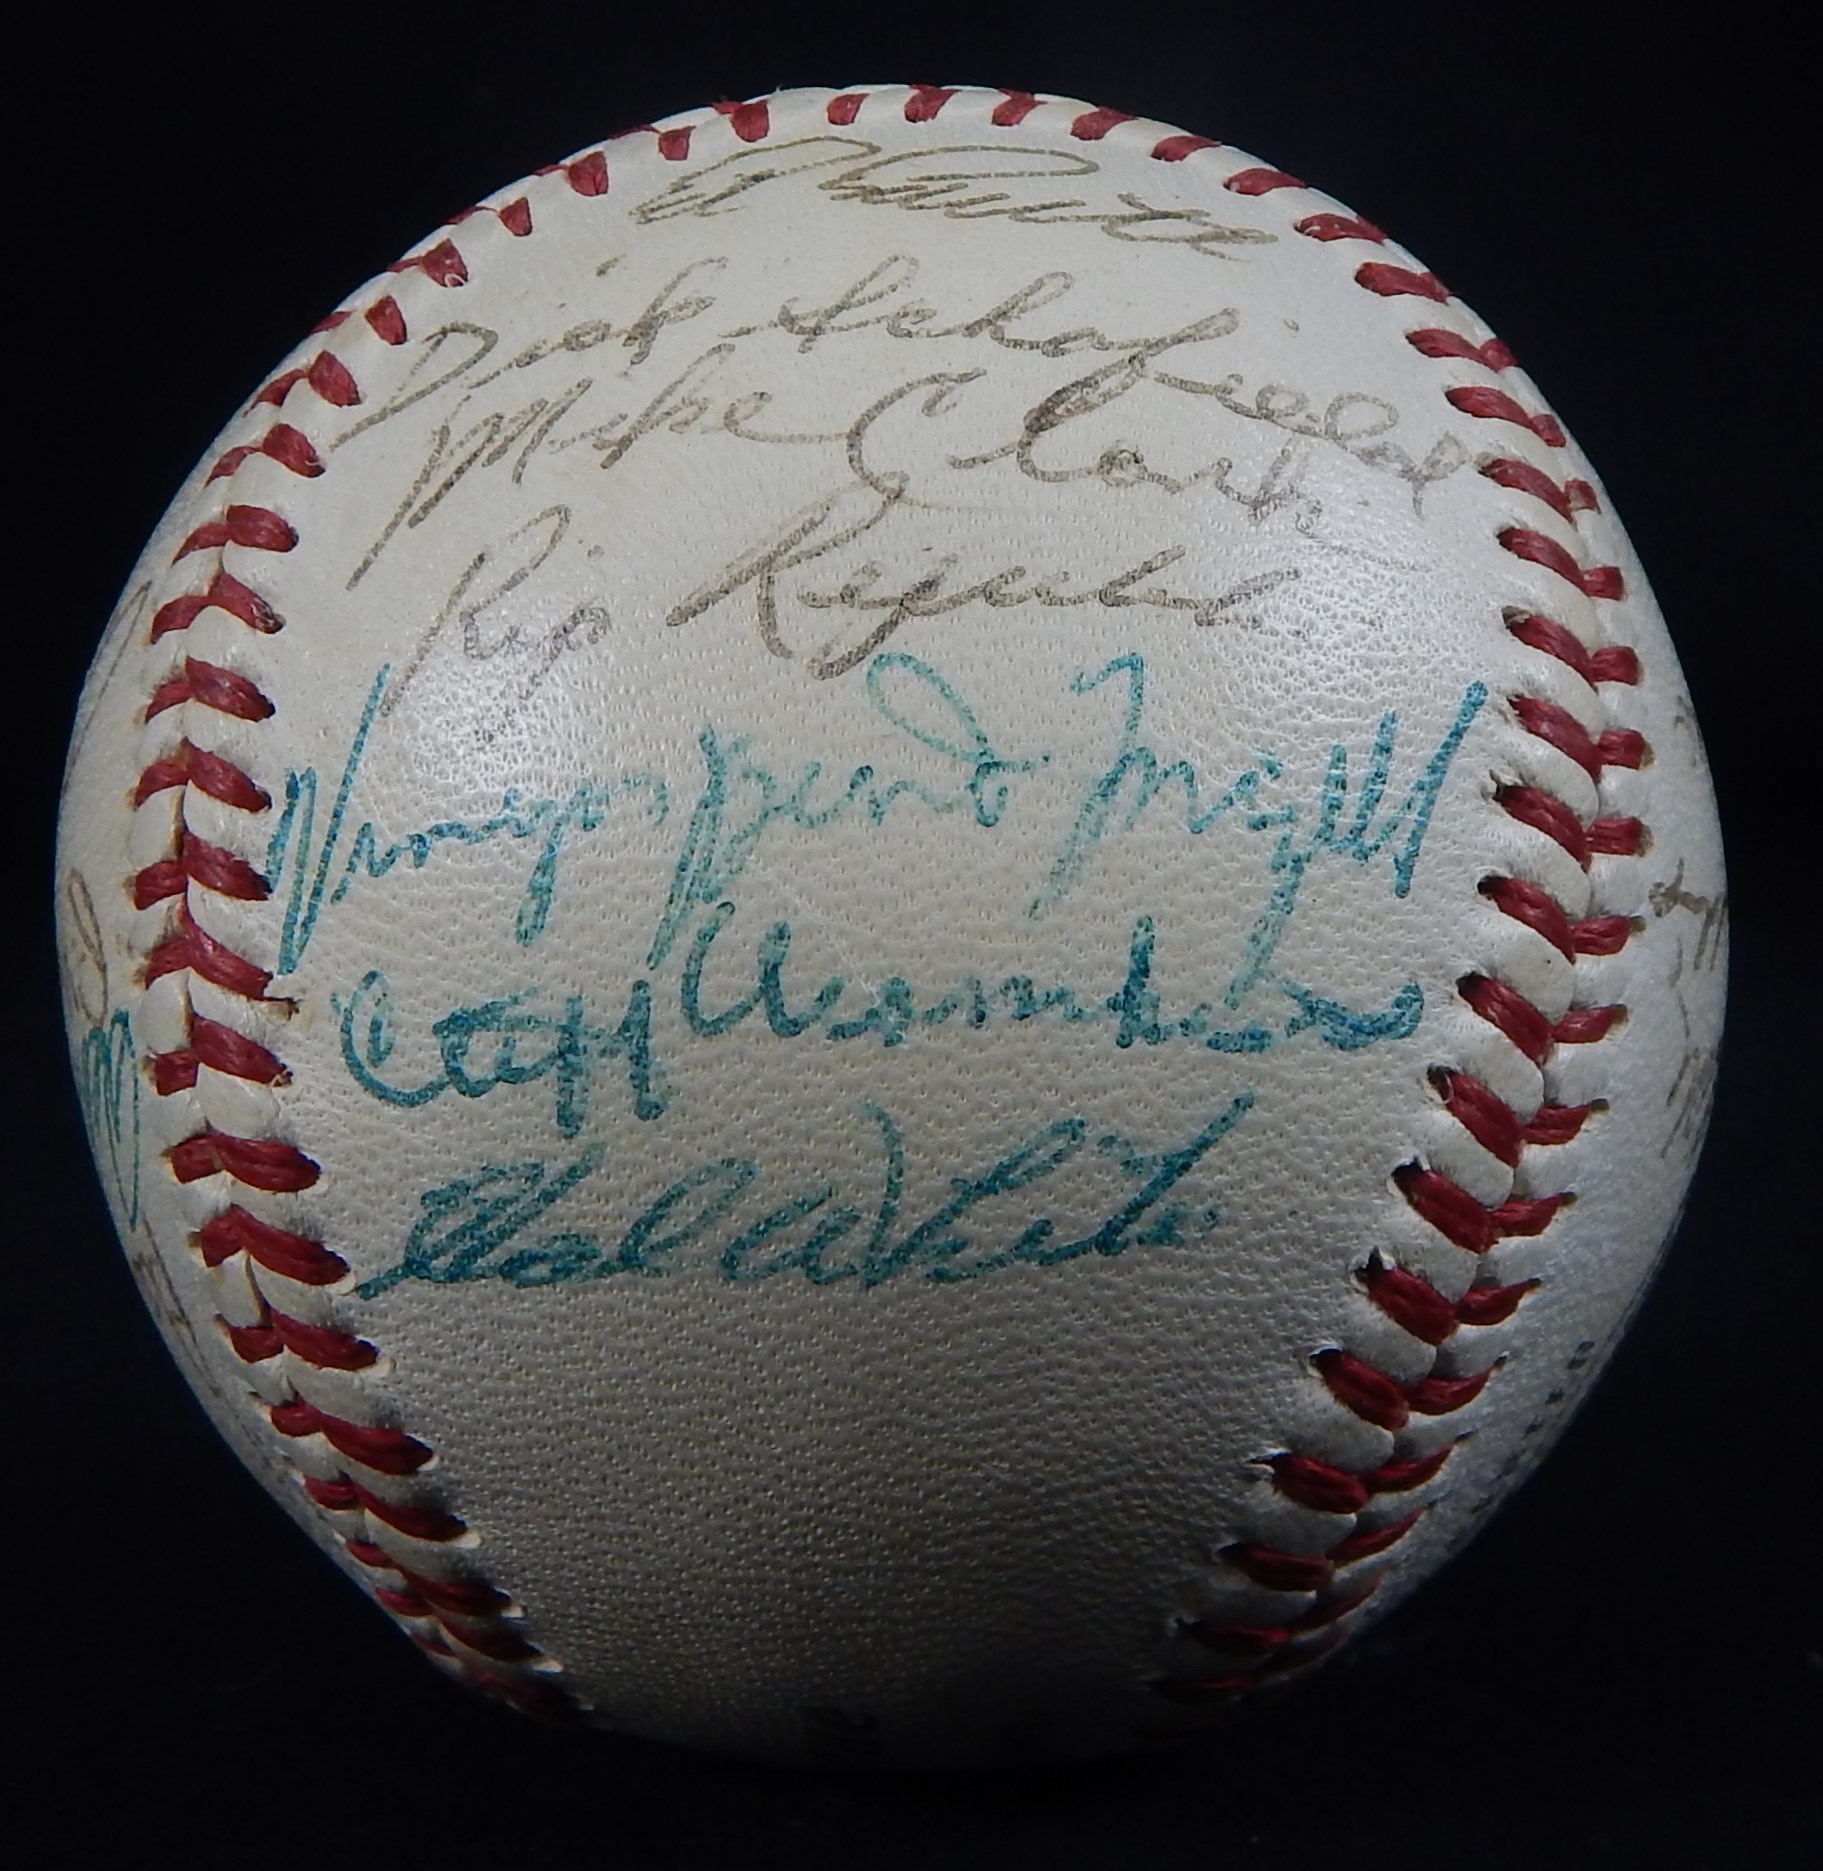 Baseball Autographs - 1953 St. Louis Cardinals Team Signed Baseball with Musial, Slaughter and Schoendienst